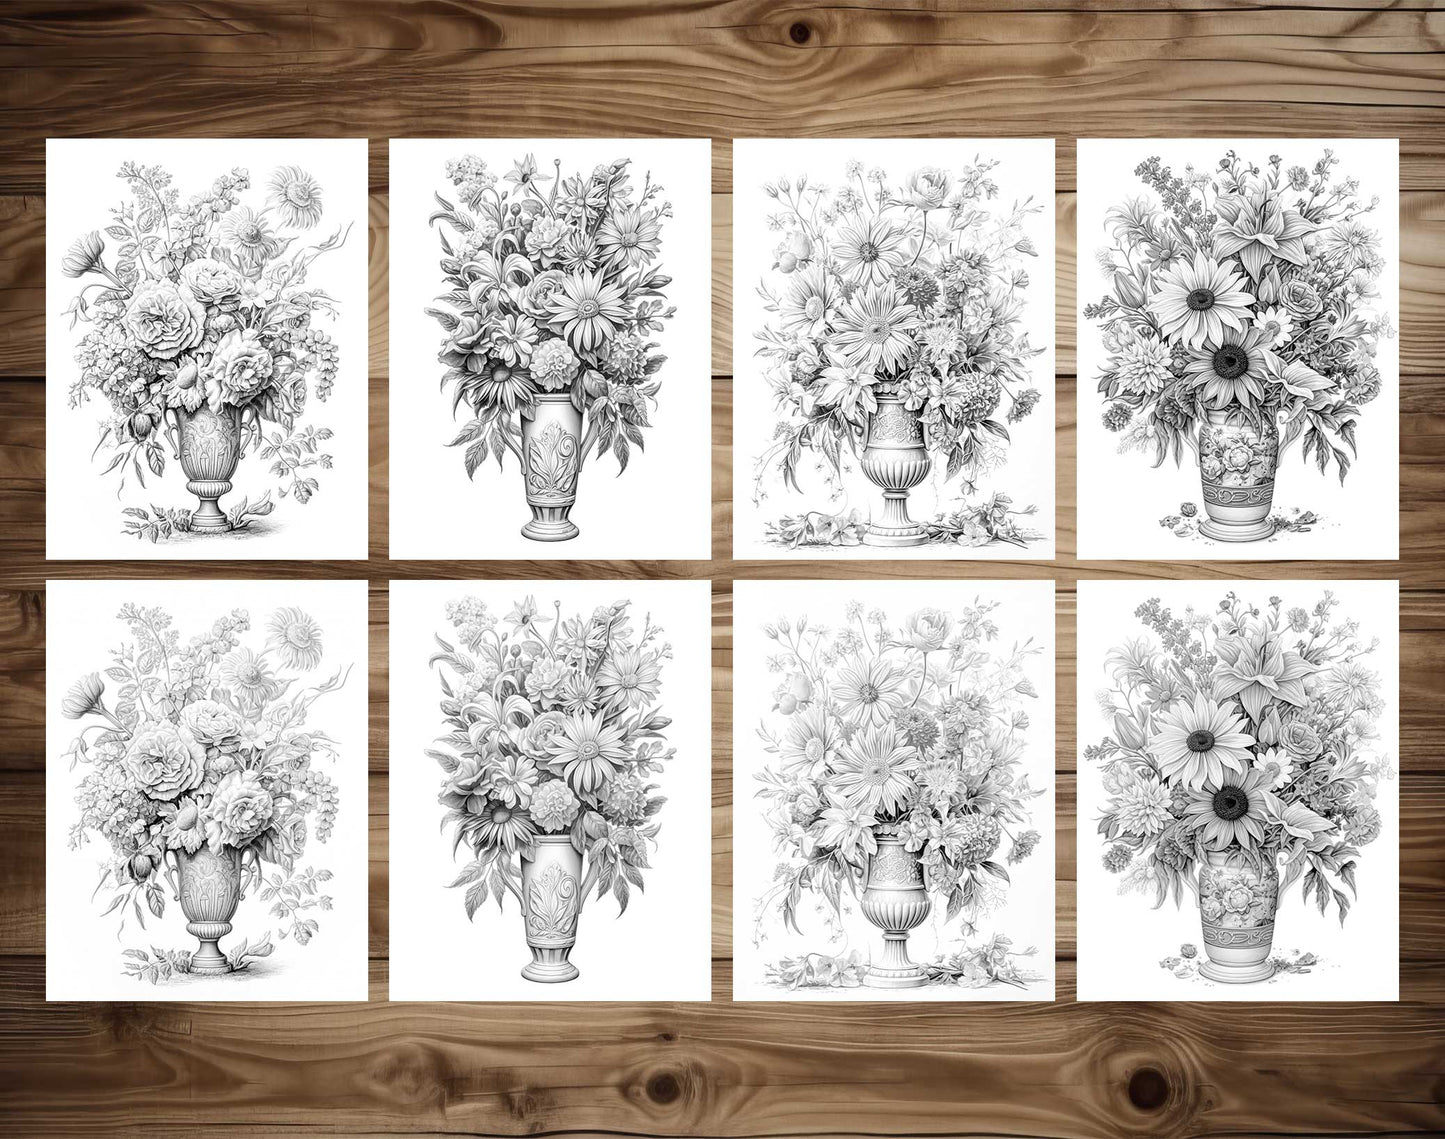 25 Flower Vases Grayscale Coloring Pages - Instant Download - Printable Dark/Light